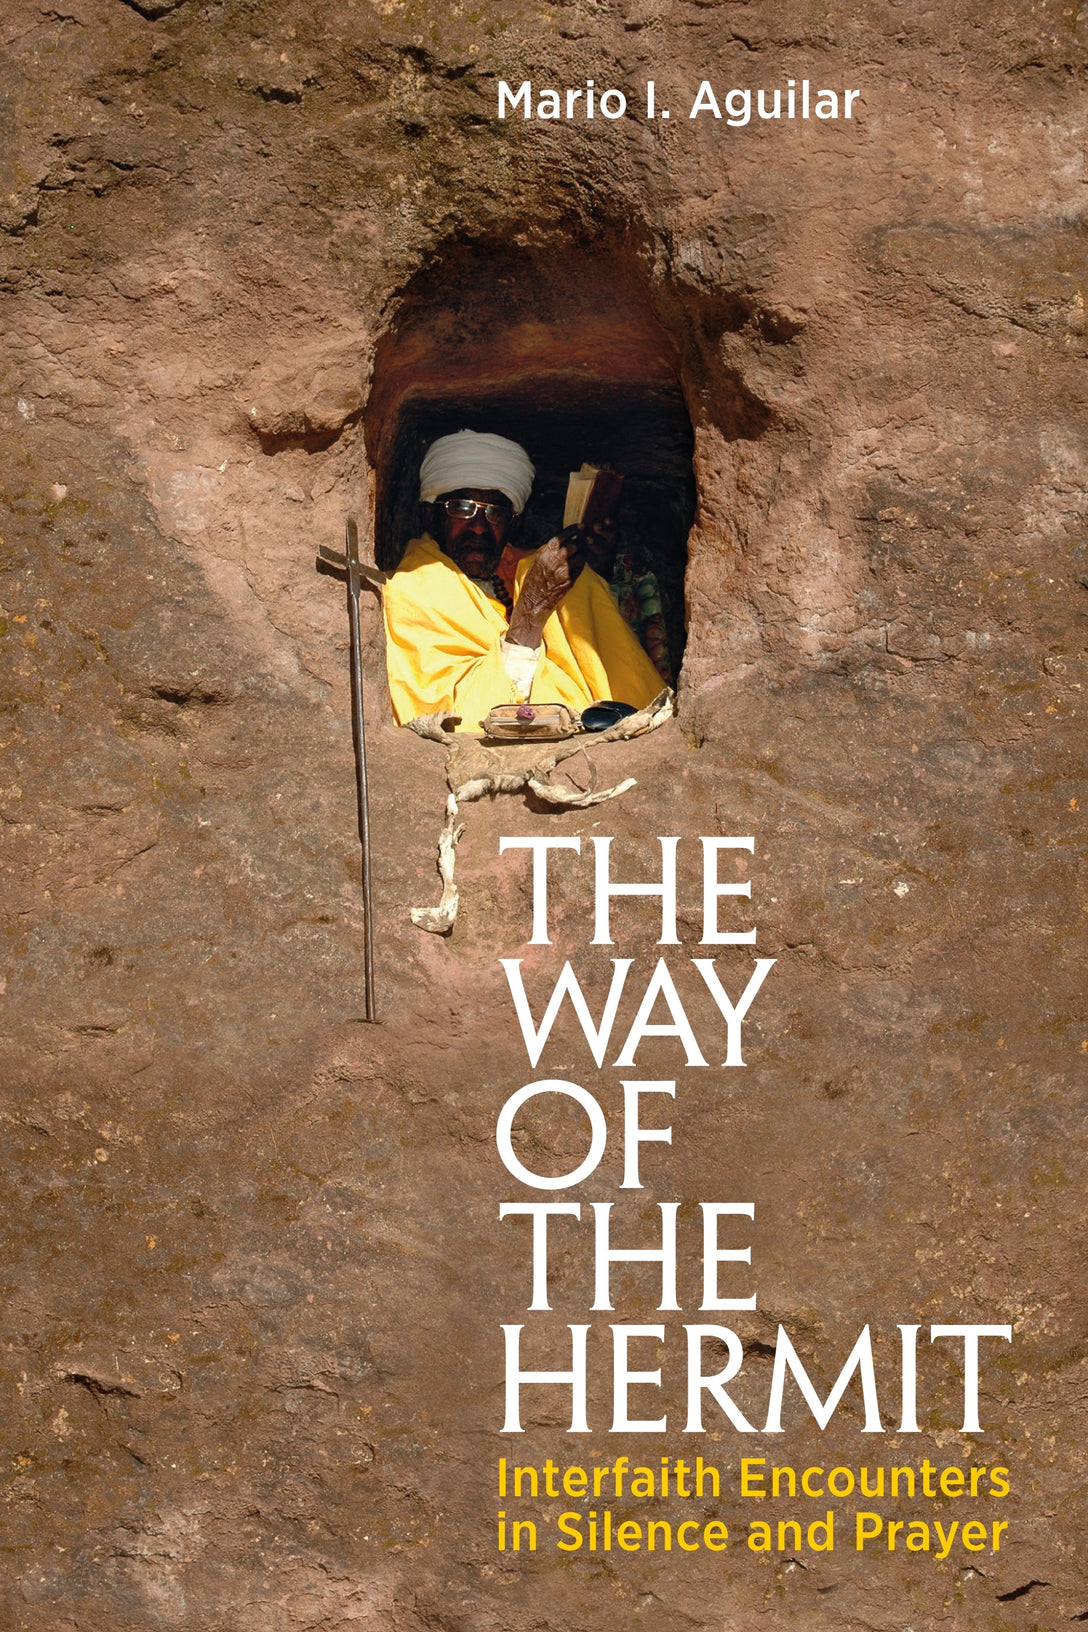 The Way of the Hermit by Mario I. Aguilar